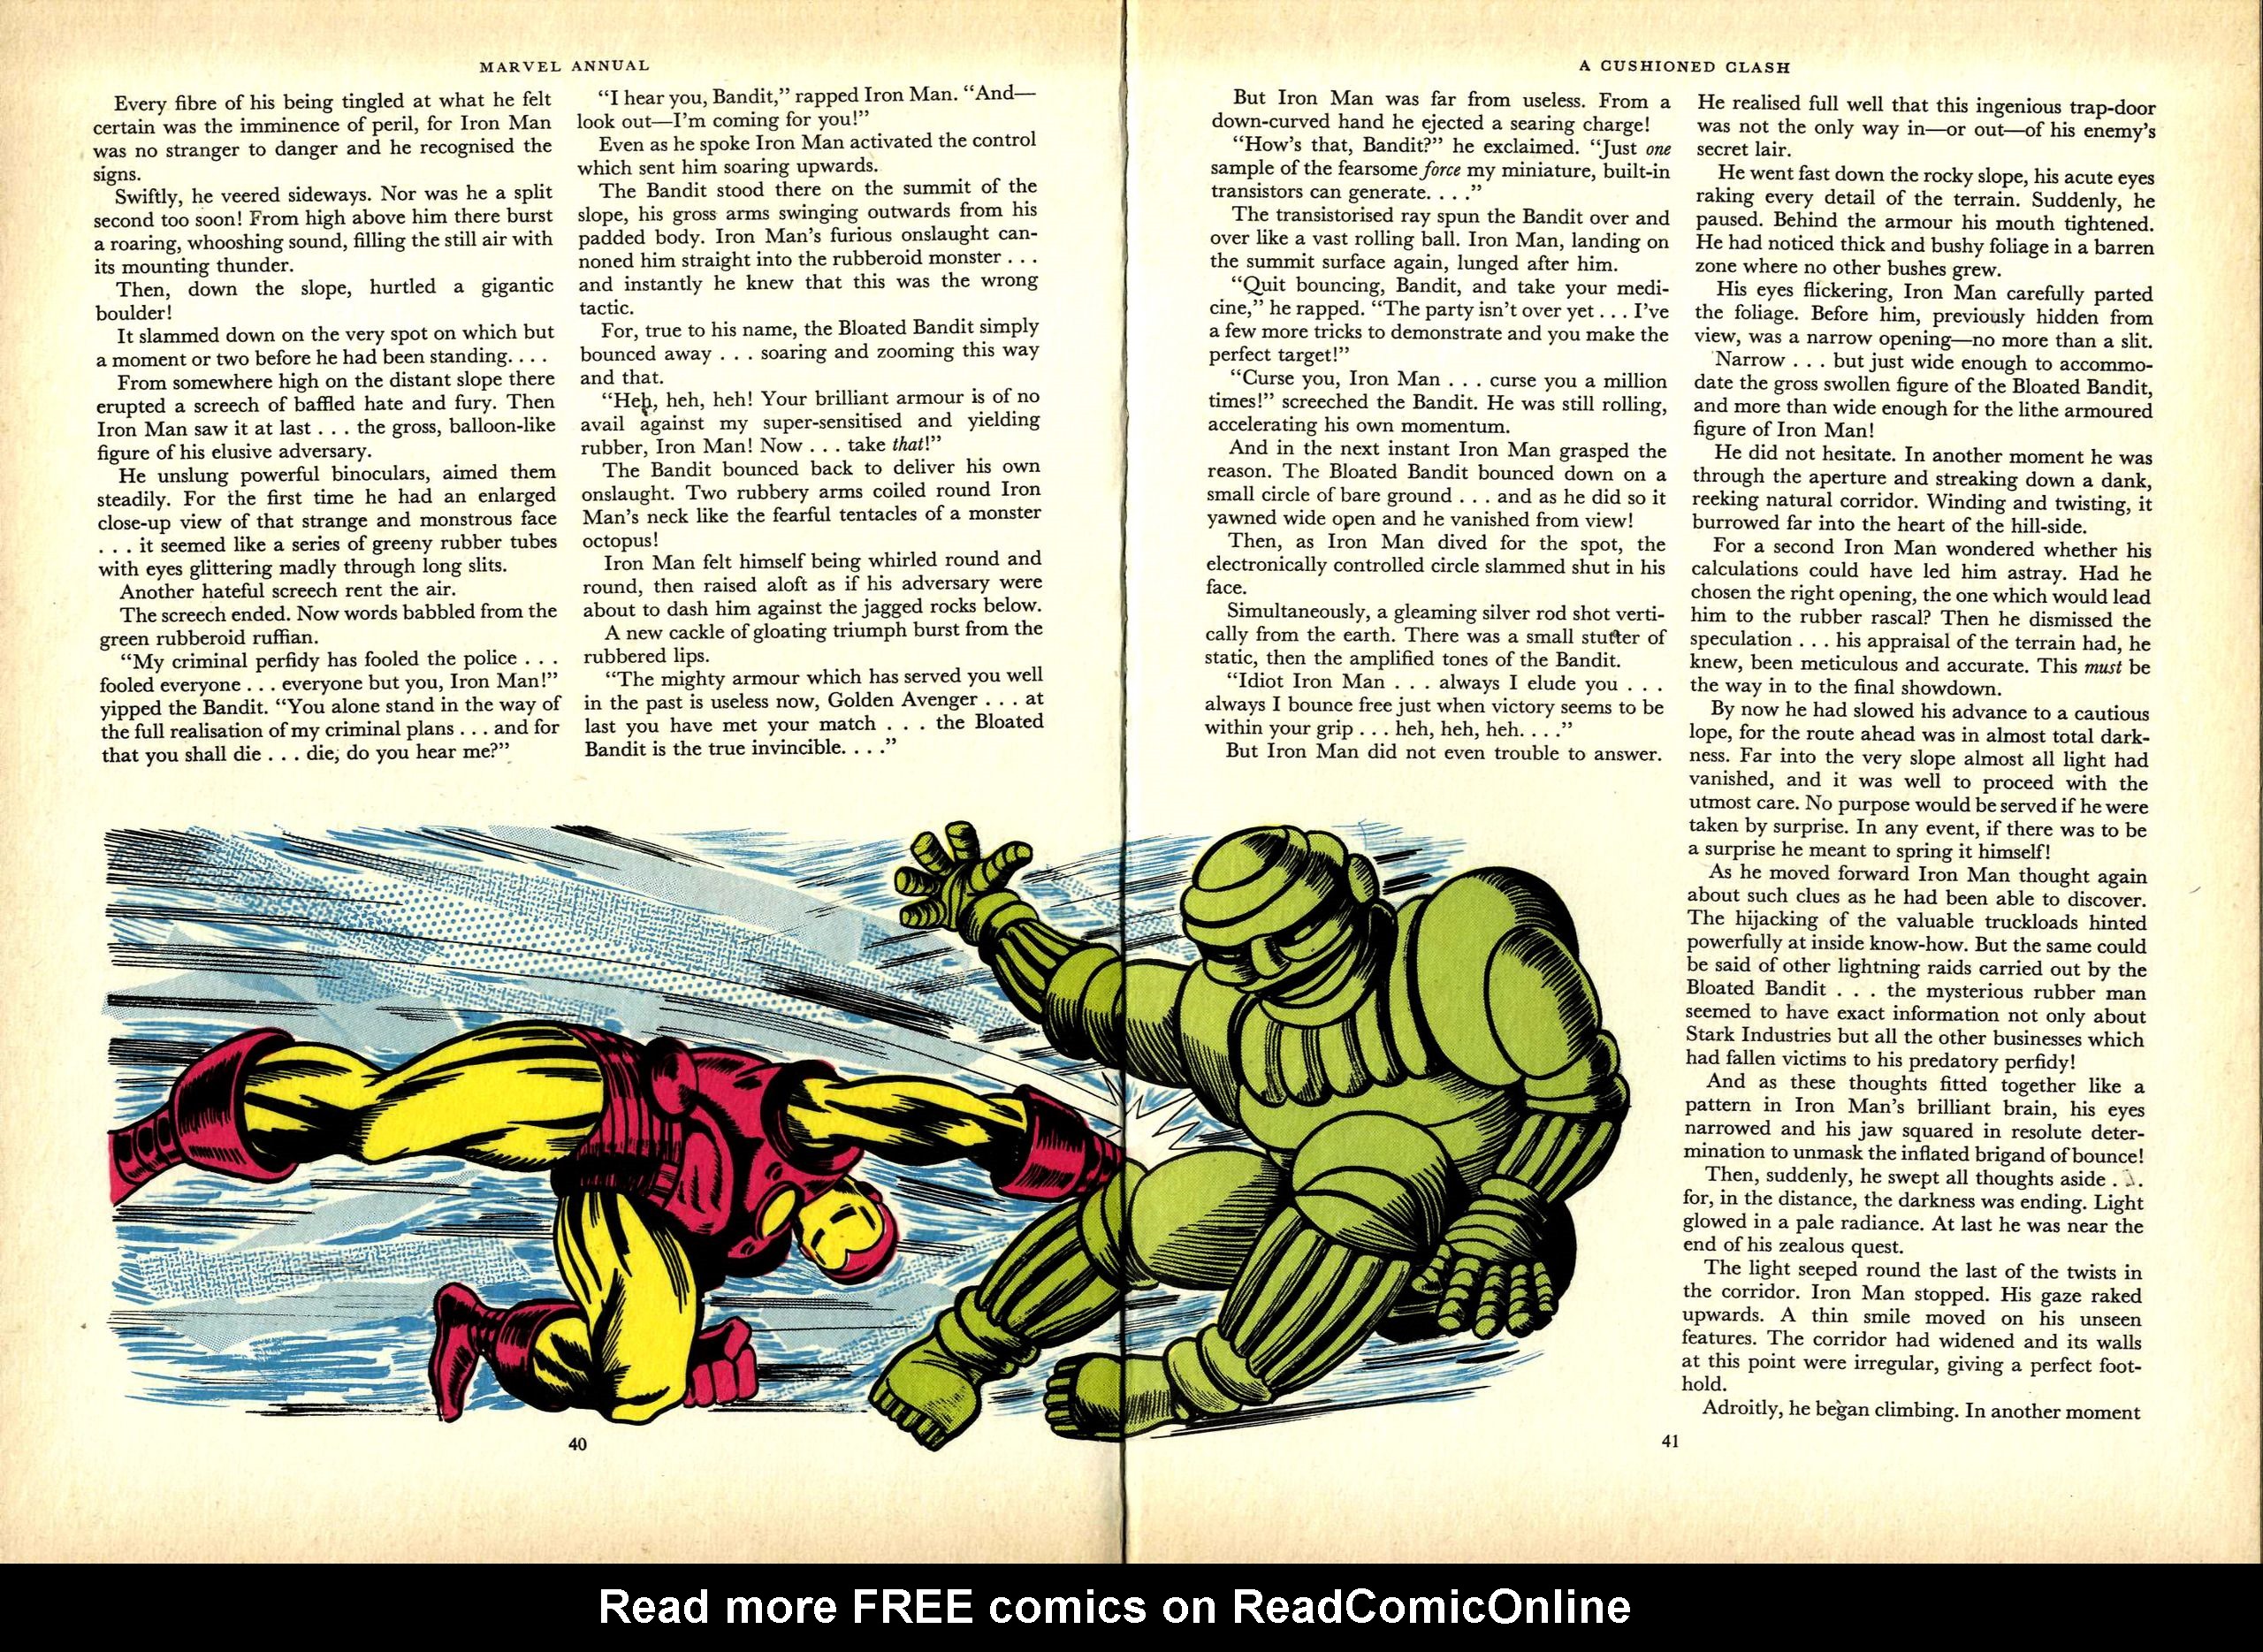 Read online Marvel Annual comic -  Issue #1967 - 21